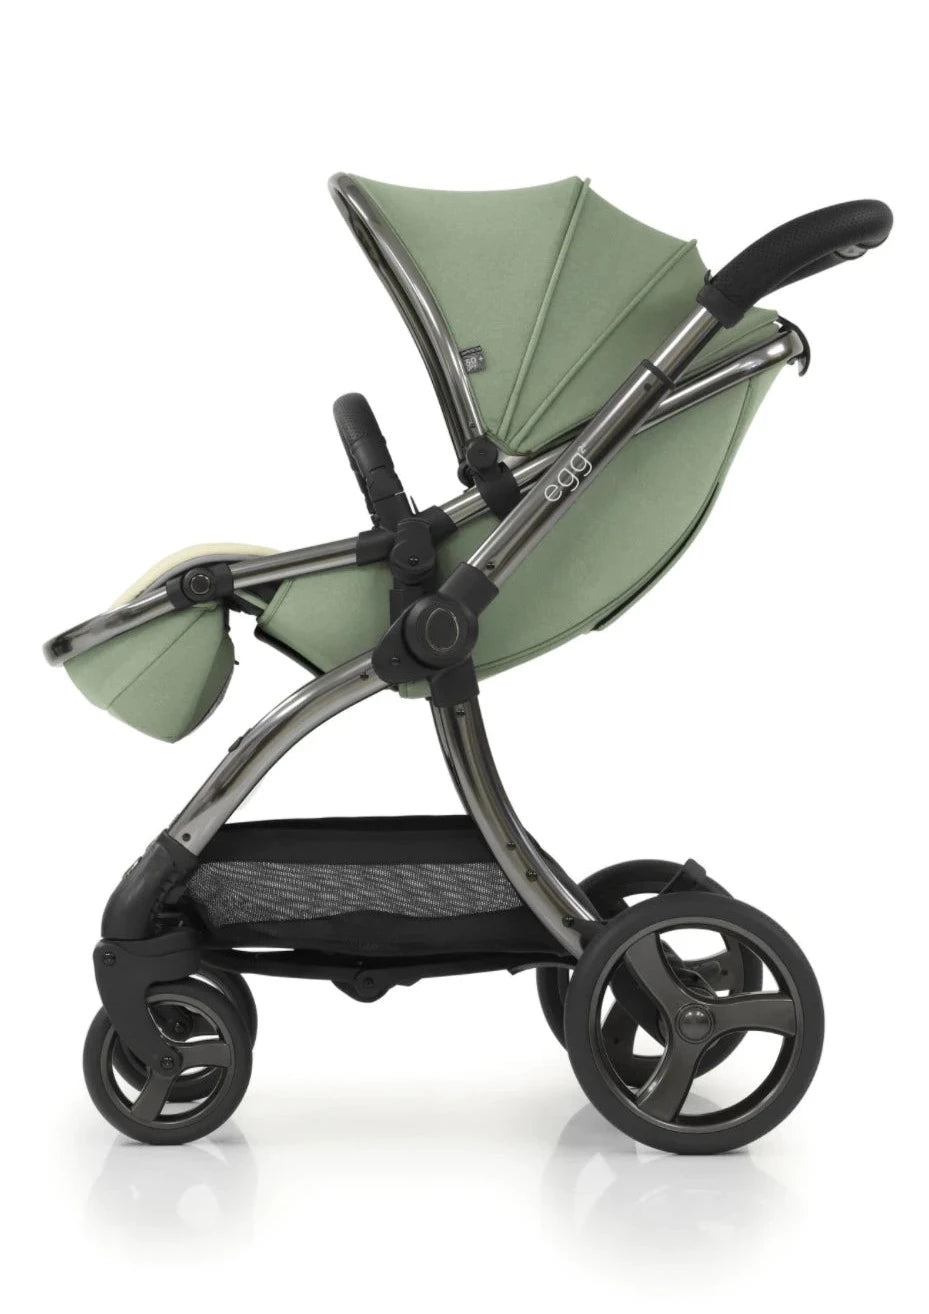 Egg 2 Seagrass Travel System